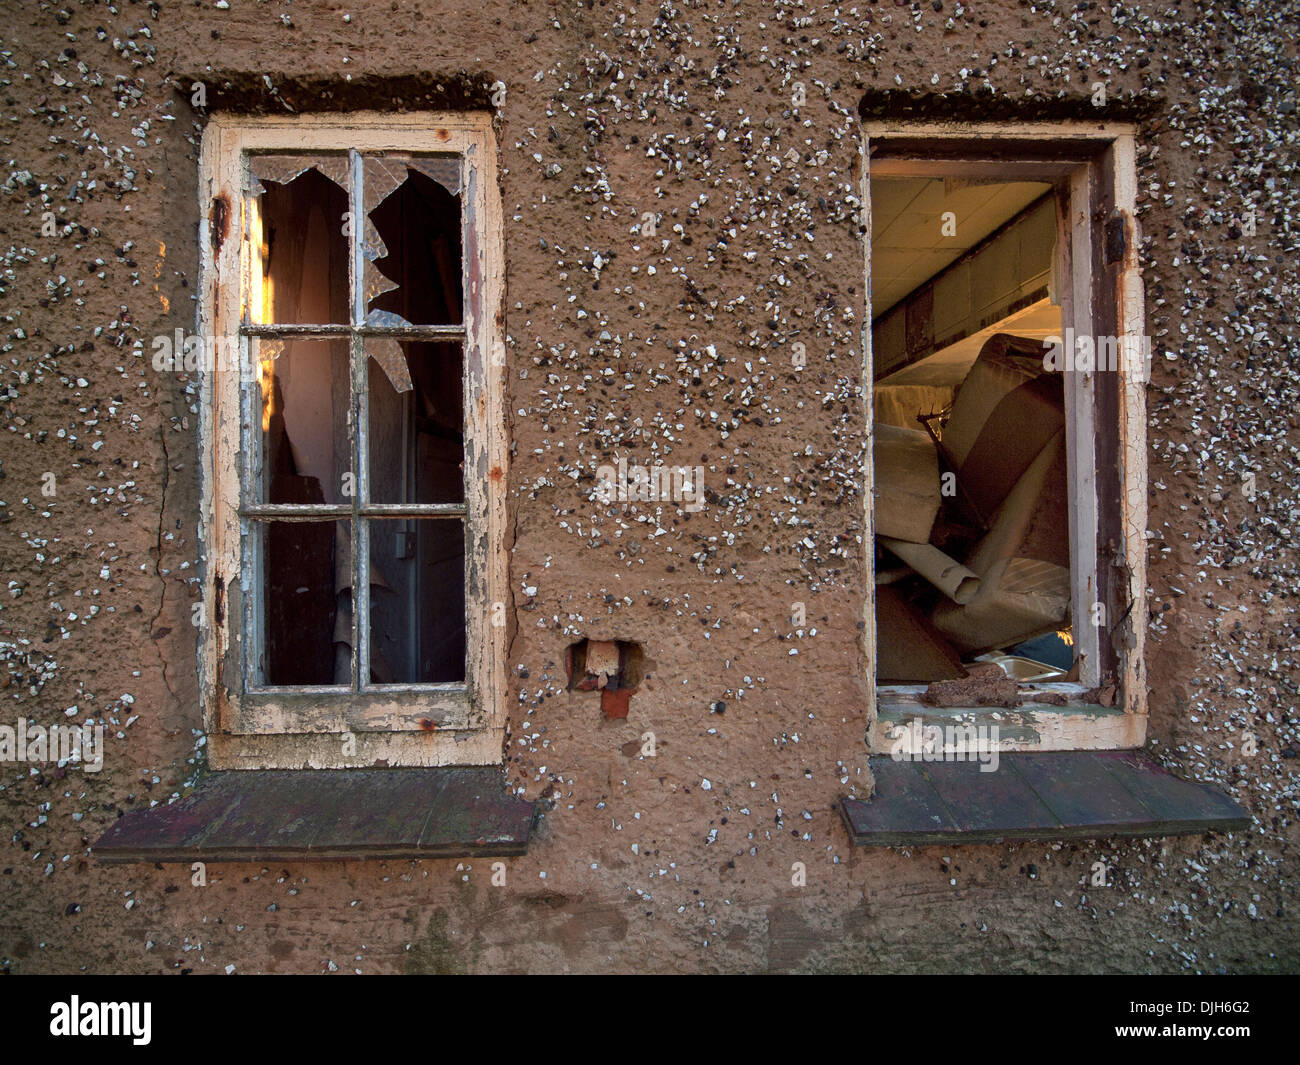 Broken windows in a derelict house in southern England Stock Photo